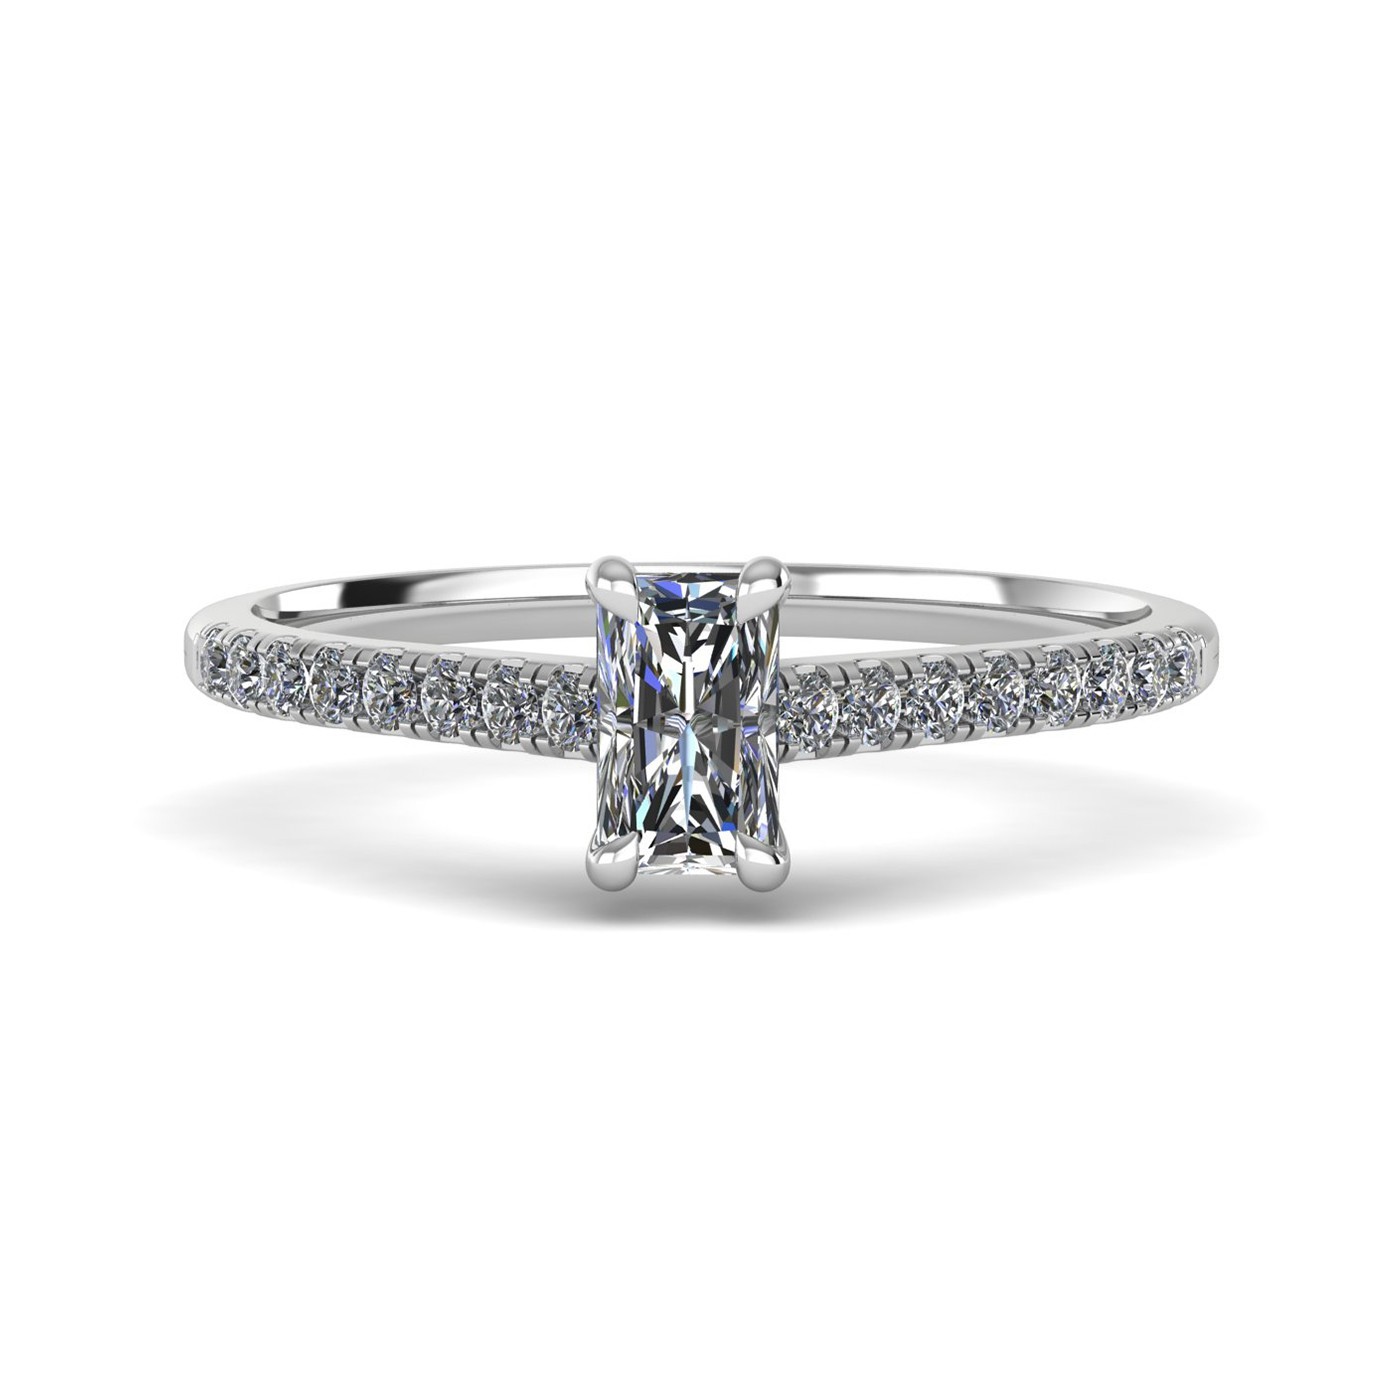 18k white gold  0,80 ct 4 prongs radiant cut diamond engagement ring with whisper thin pavÉ set band Photos & images